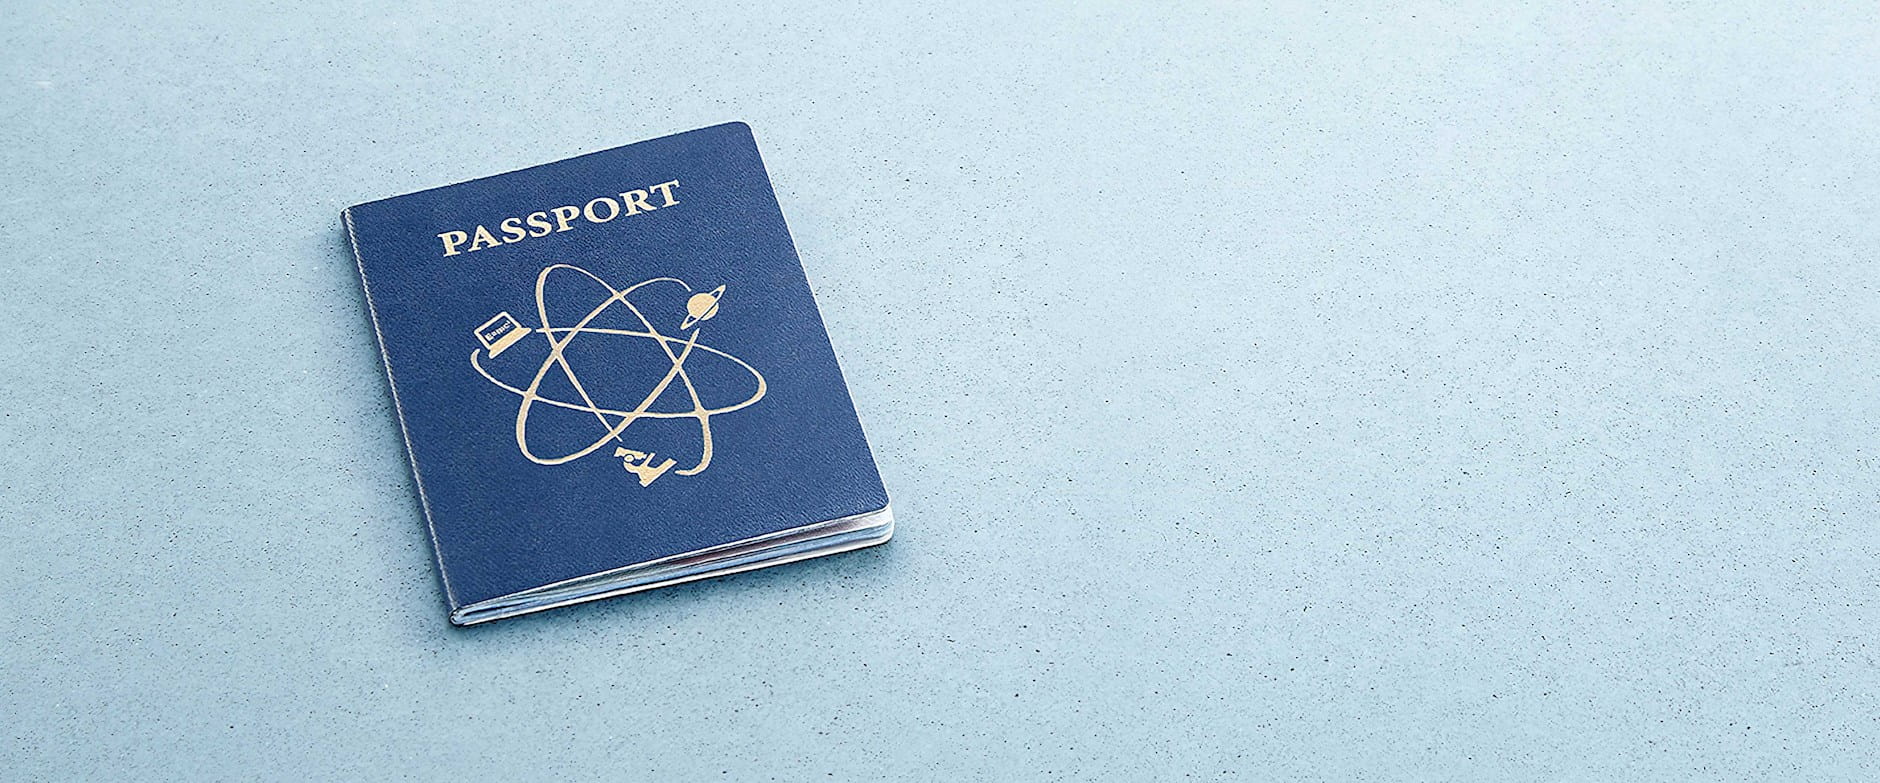 Passport with work-related symbols like a microscope and computer on it